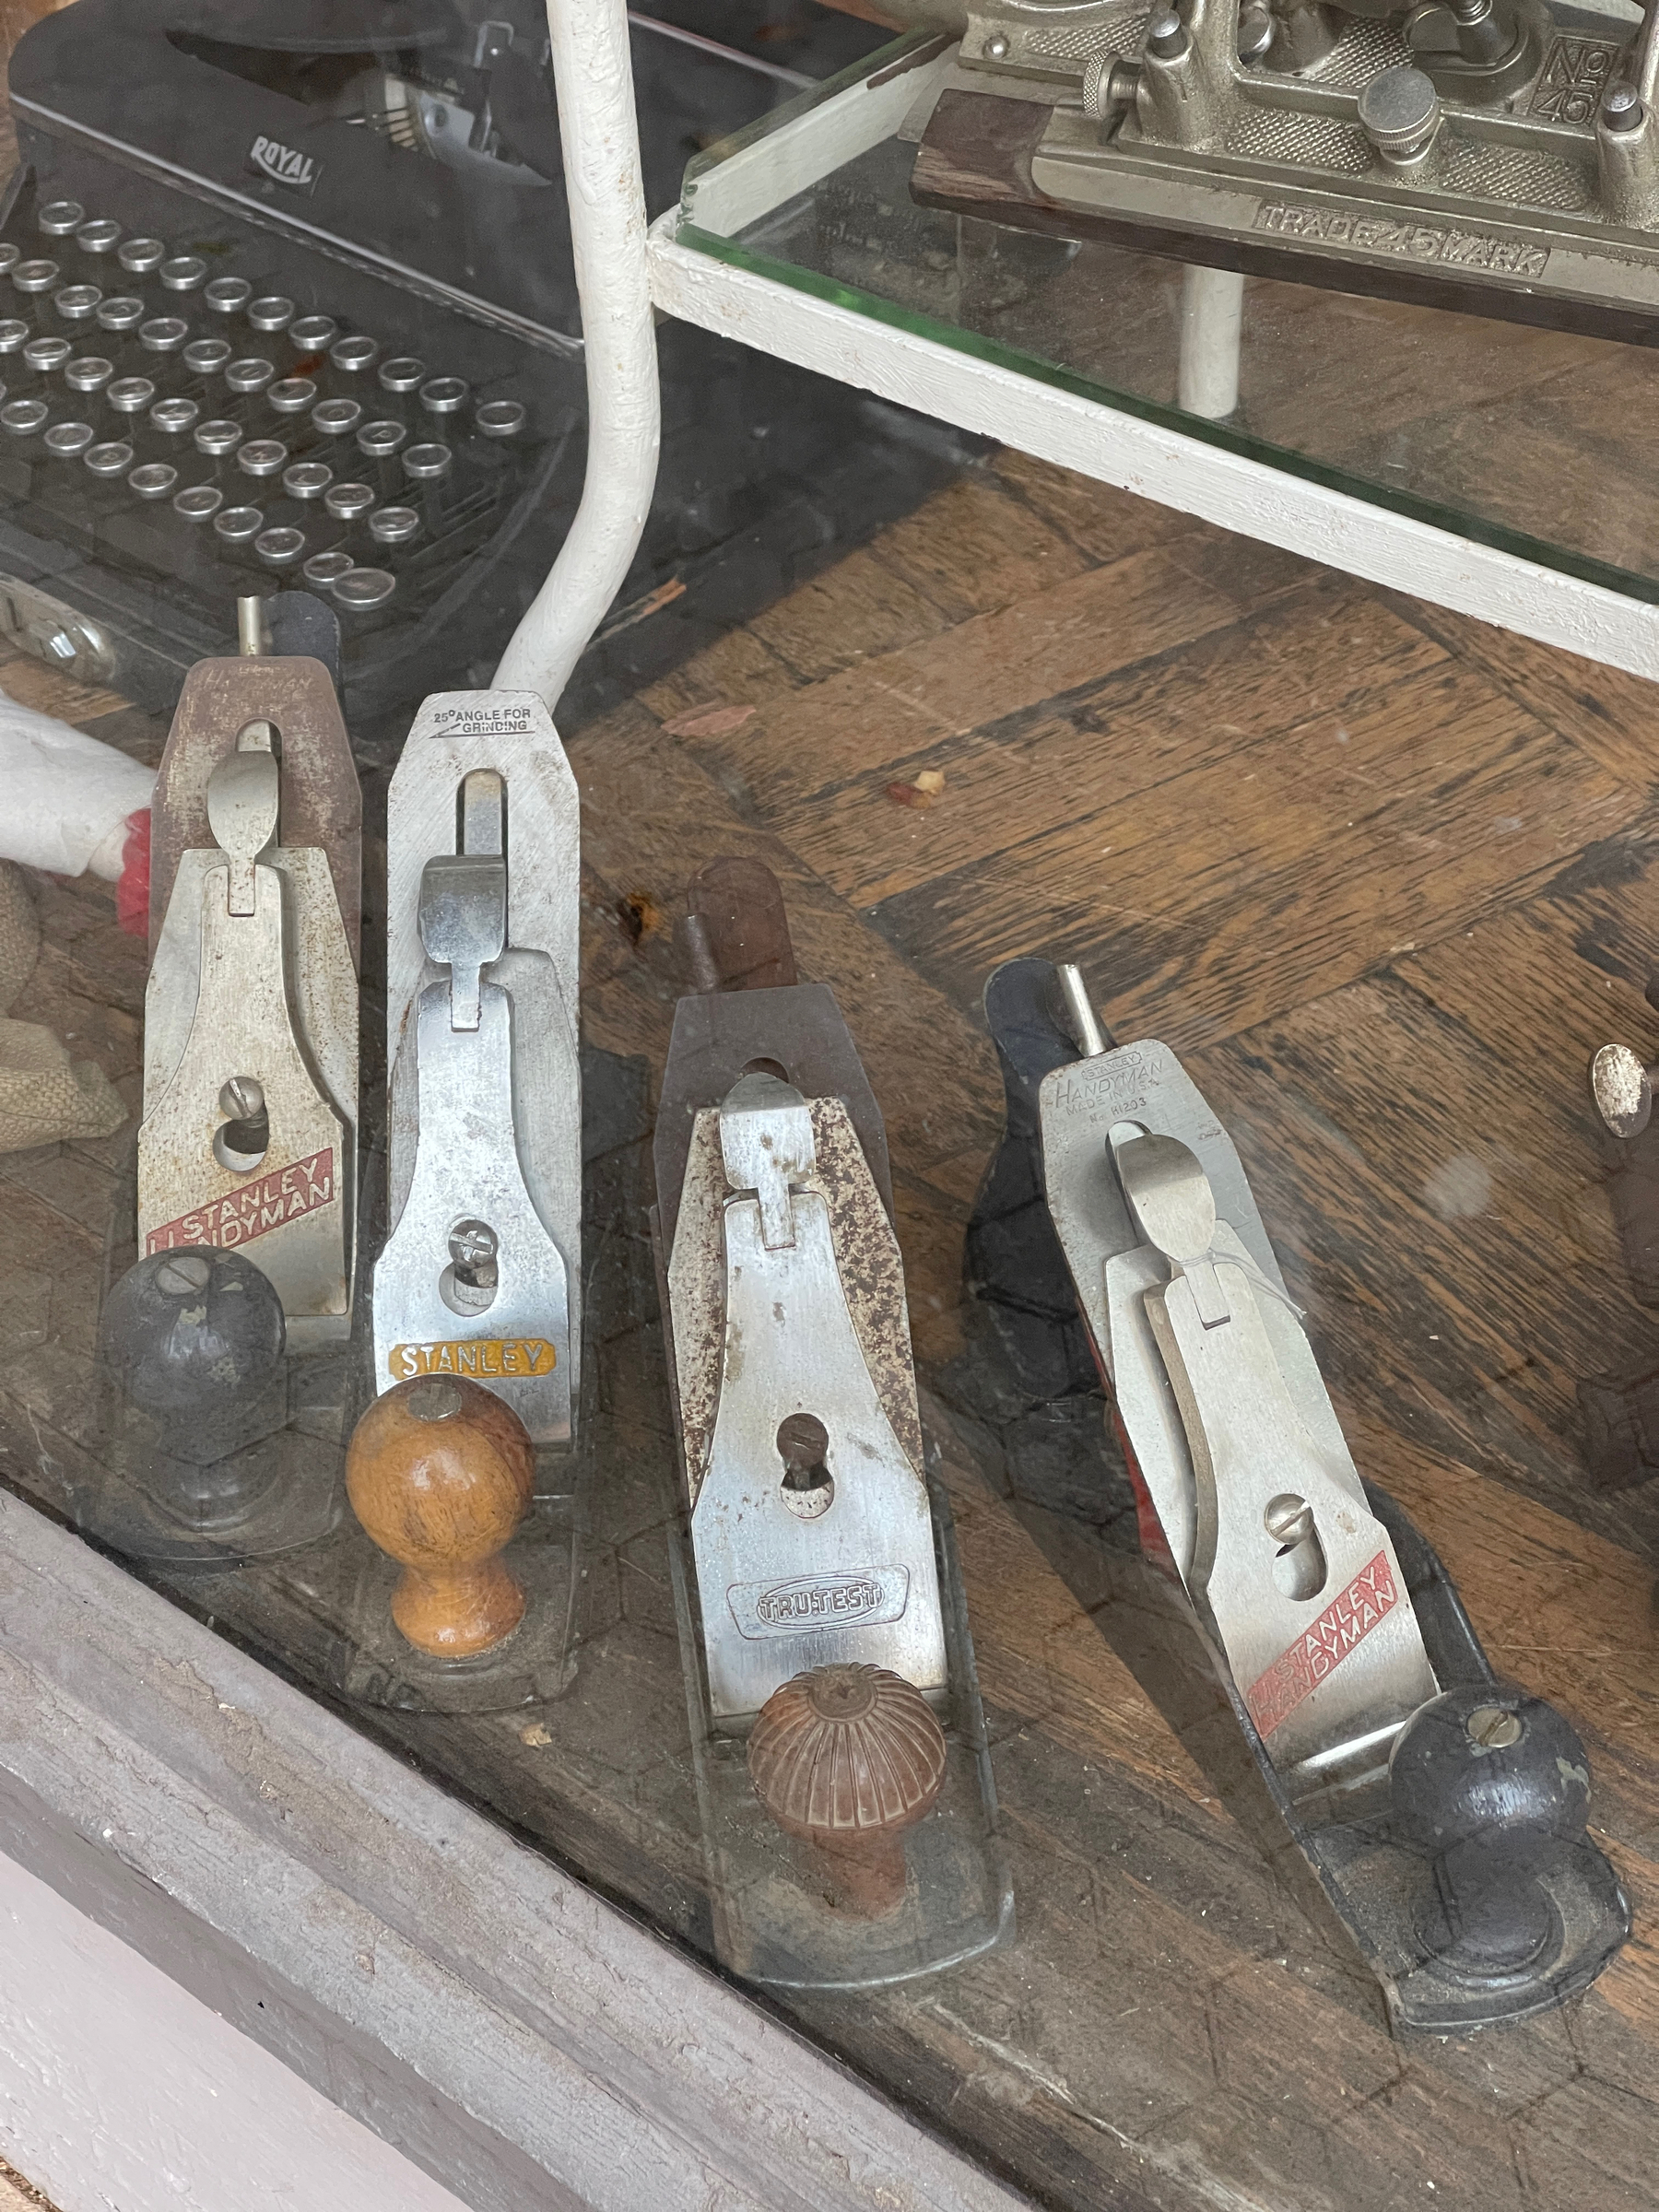 4 antique wood planes in a row in a shop window.